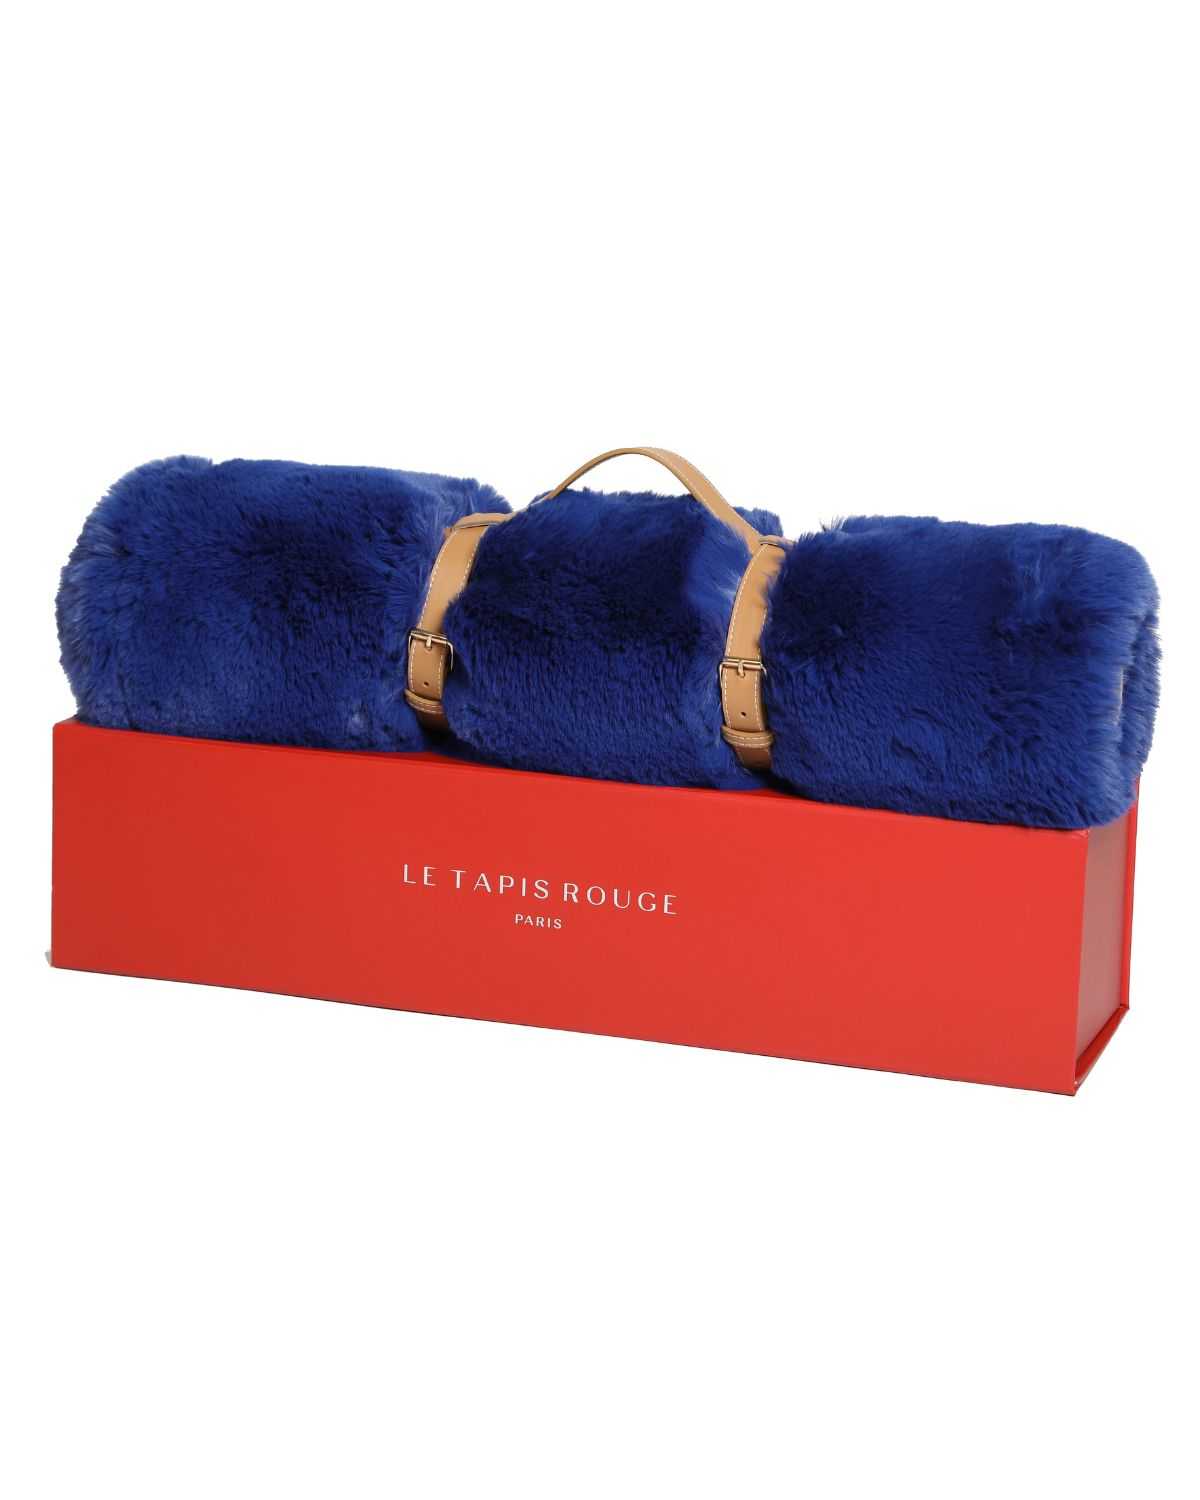 Le Tapis Londres | Le Tapis Rouge Paris | Luxury synthetic fur rug for dogs and cats